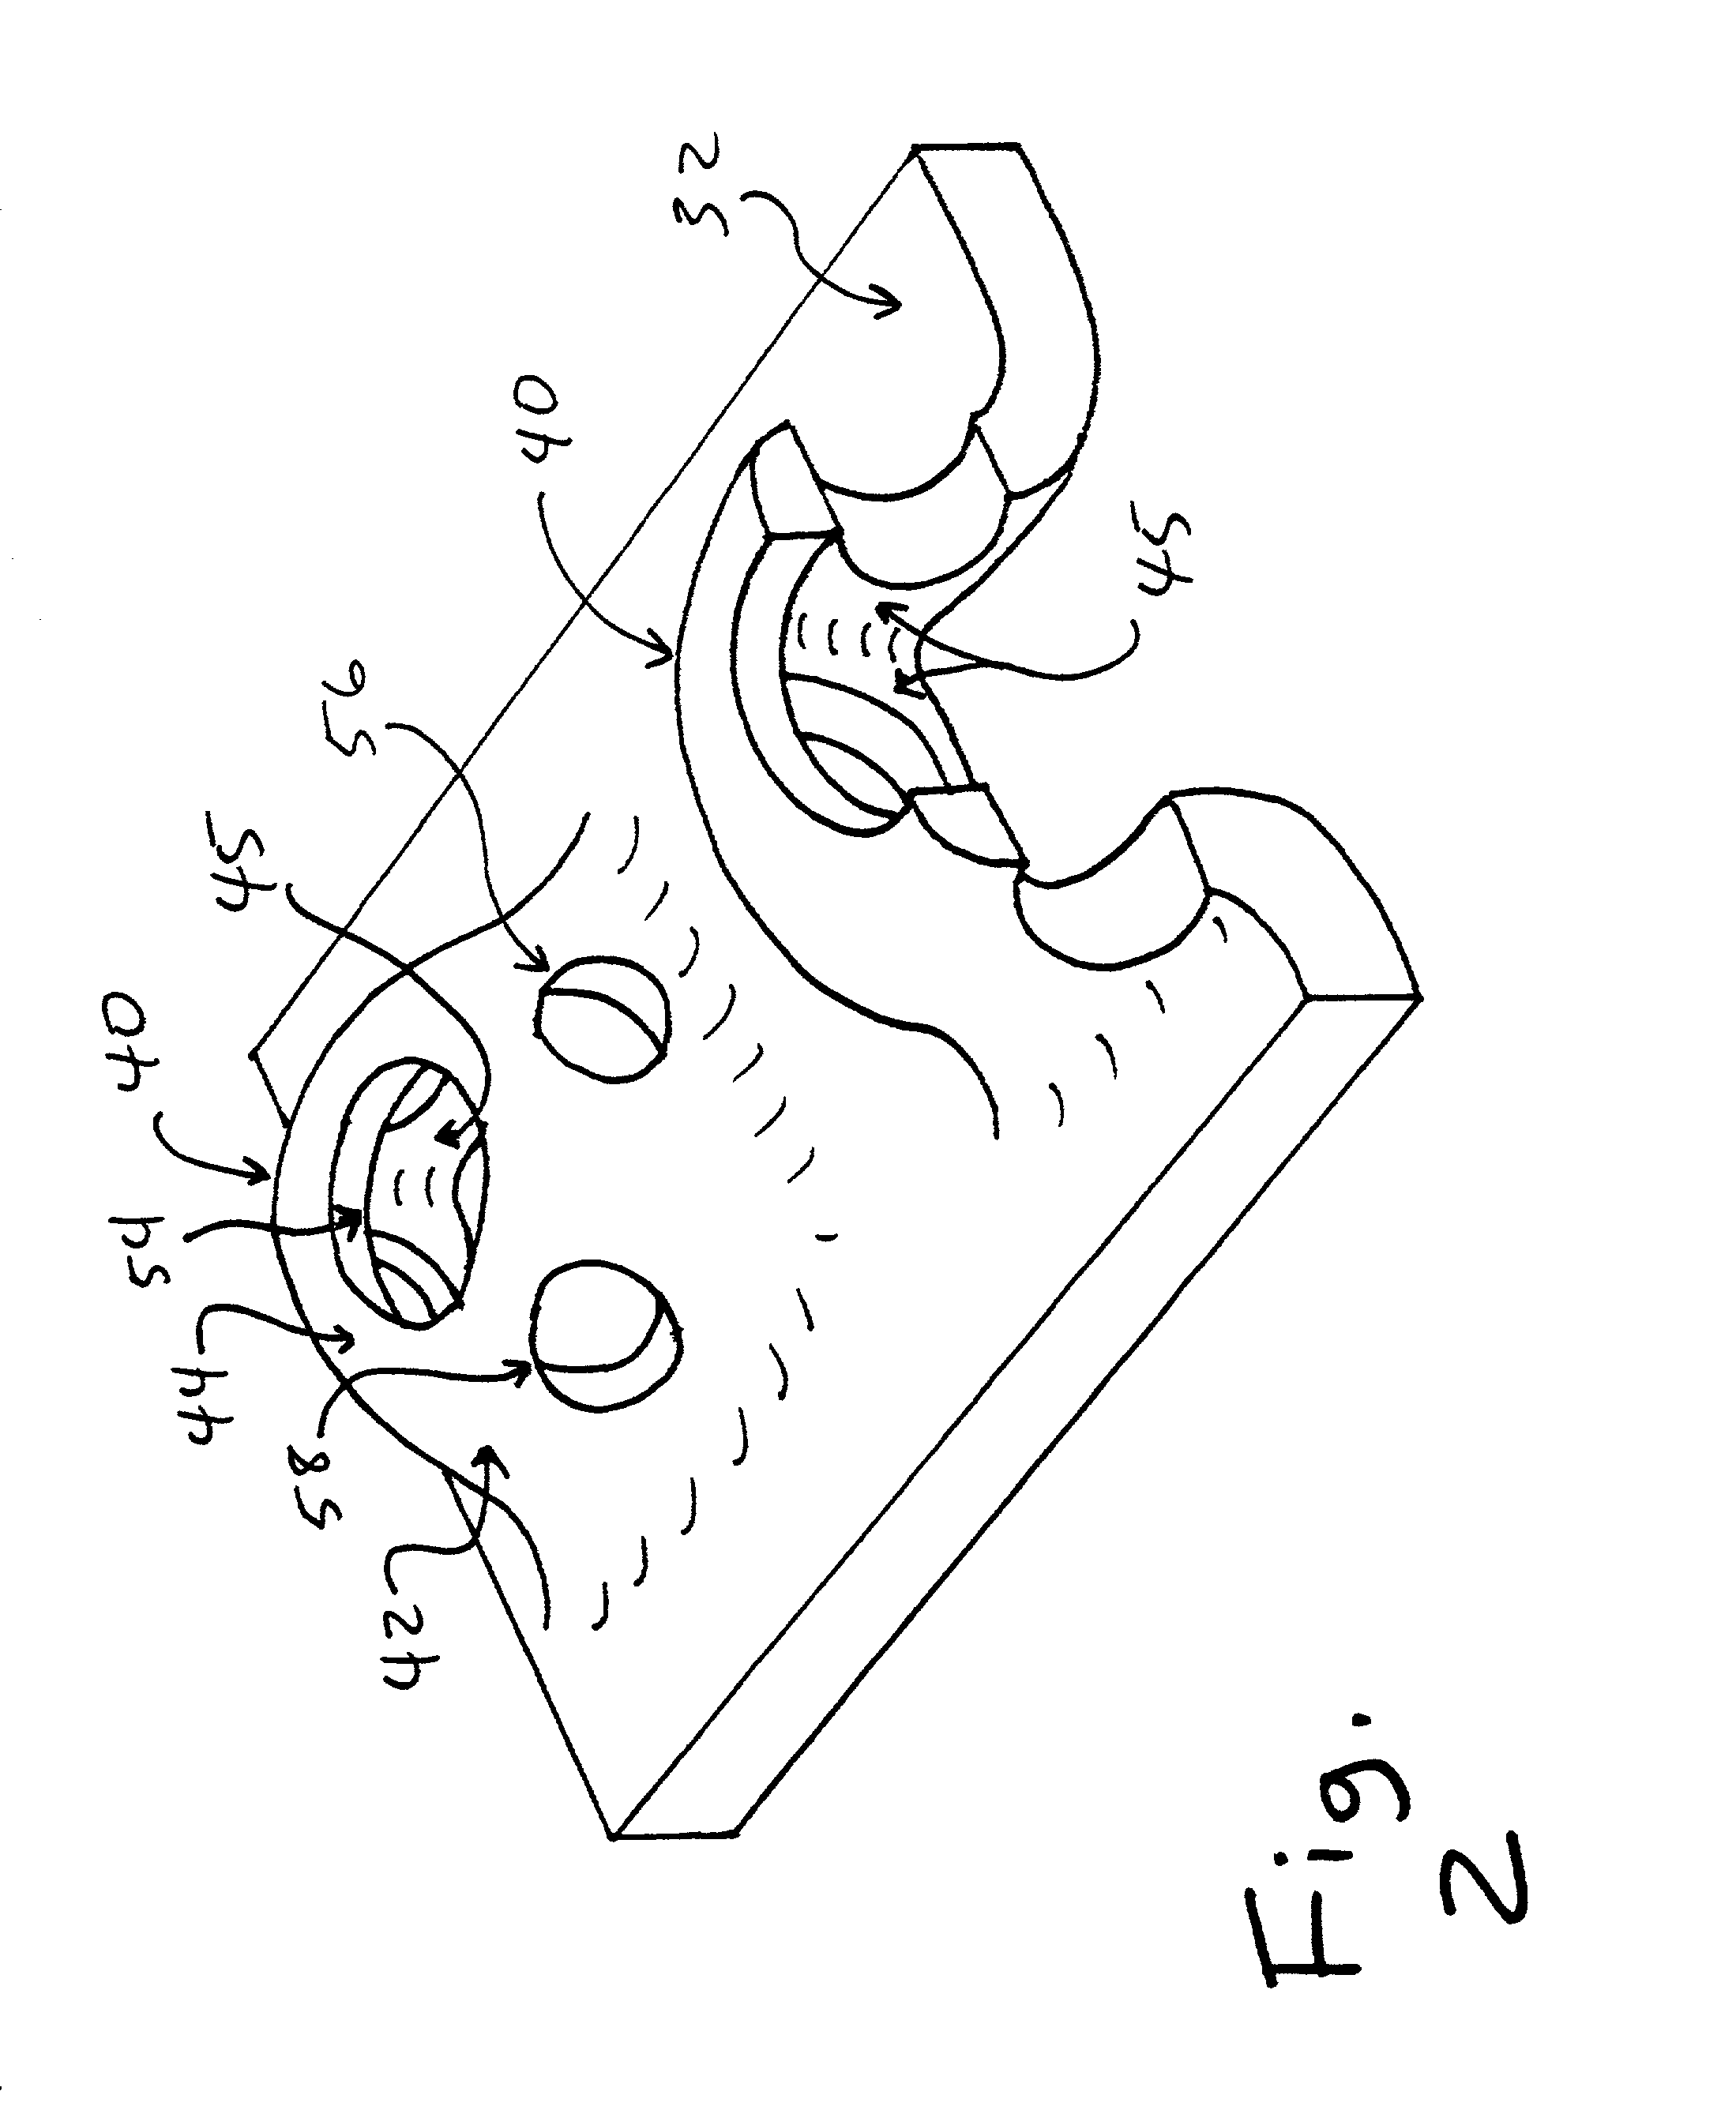 Cartilage repair implant with soft bearing surface and flexible anchoring device